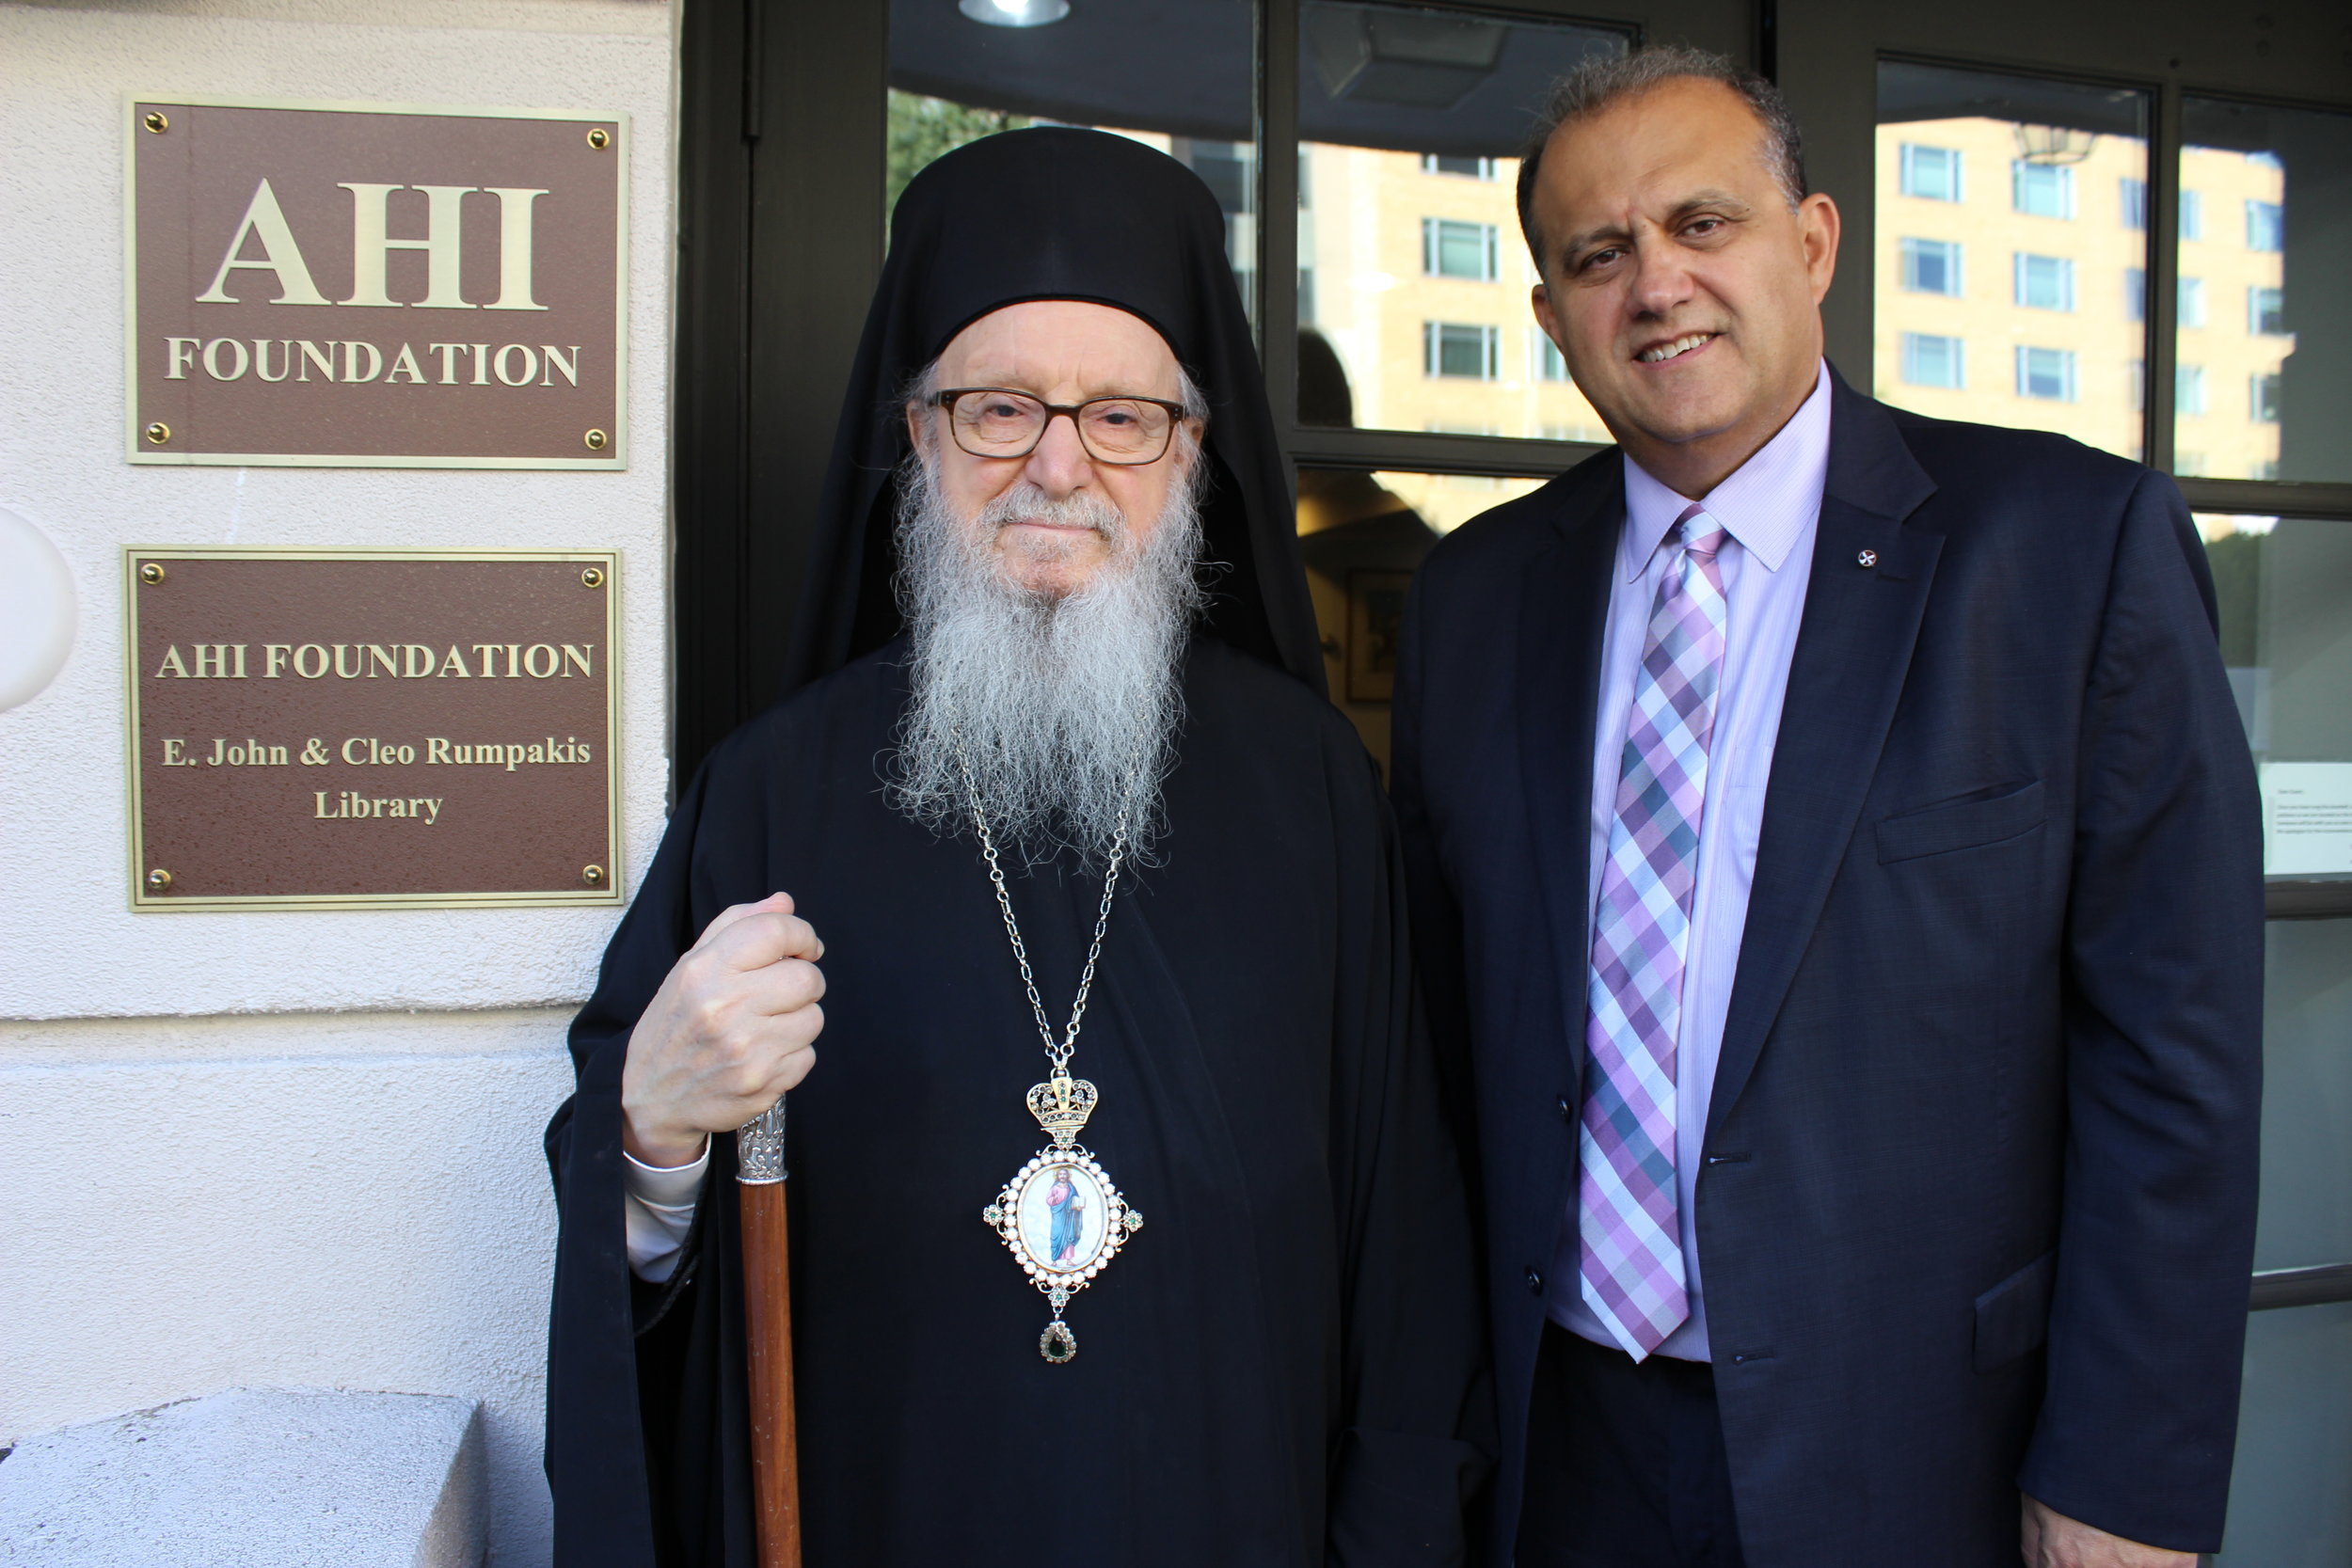  His Eminence Archbishop Demetrios of America and AHI President Nick Larigakis in front of the sign identifying the AHI Foundation E. John &amp; Cleo Rumpakis Library situated at the front entrance to the Hellenic House. 